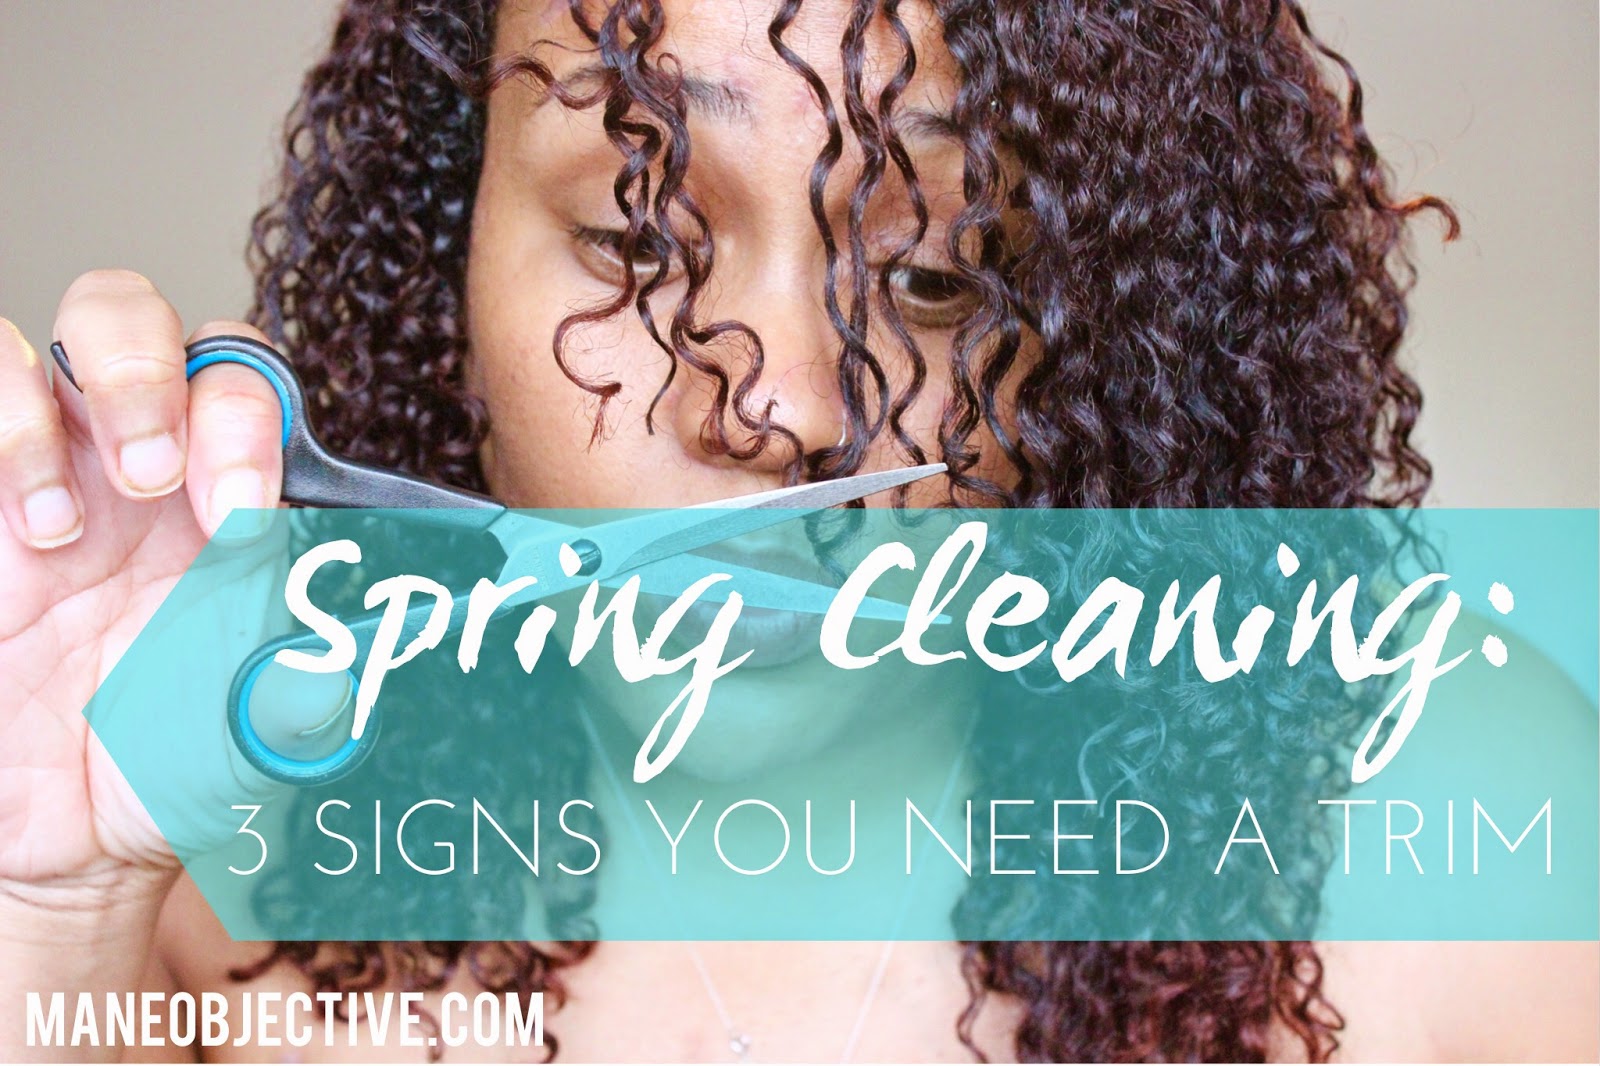 Spring Cleaning: 3 Signs You Need a Trim this Season